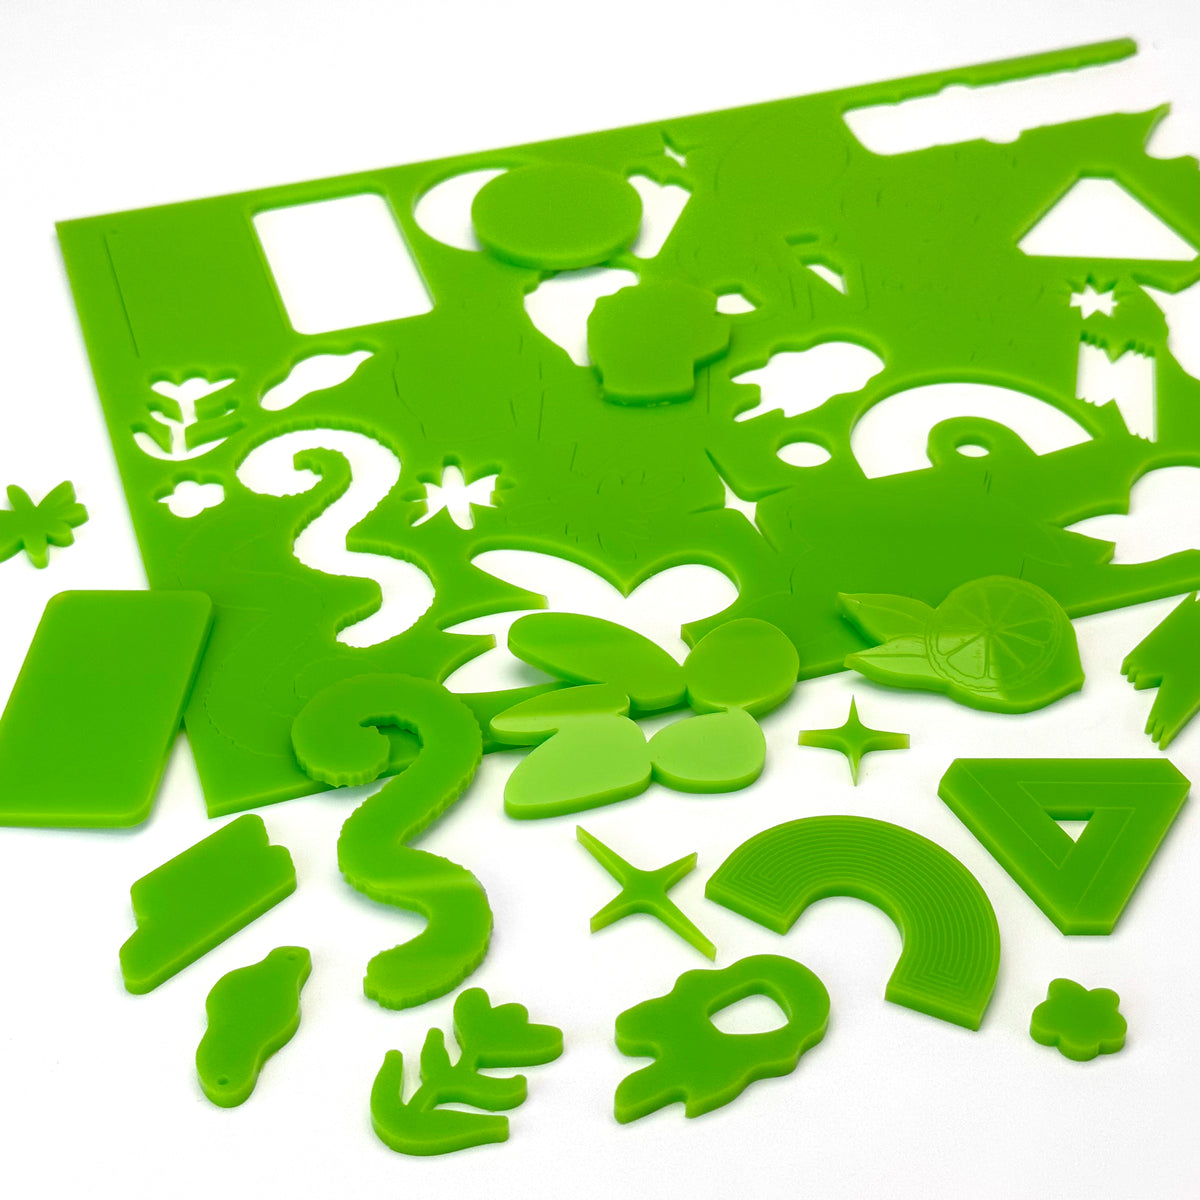 Lime Green Acrylic with laser cutting only - 300x200mm